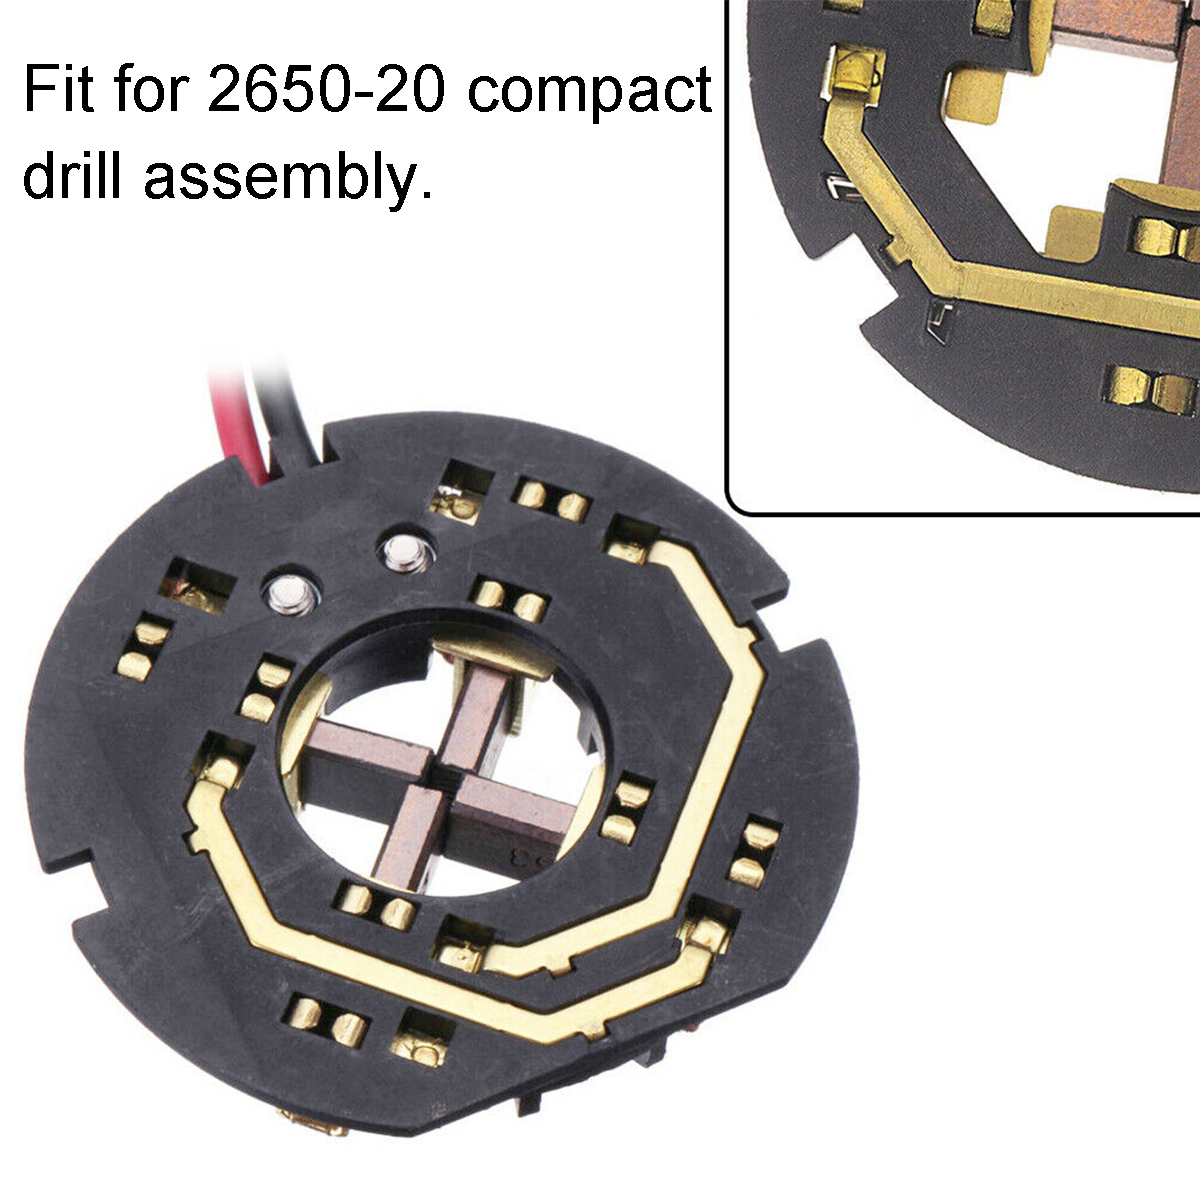 Compact-Driver-Drill-Carbon-Brush-Fit-for-2650-20-Compact-Drill-Assembly-1632445-6